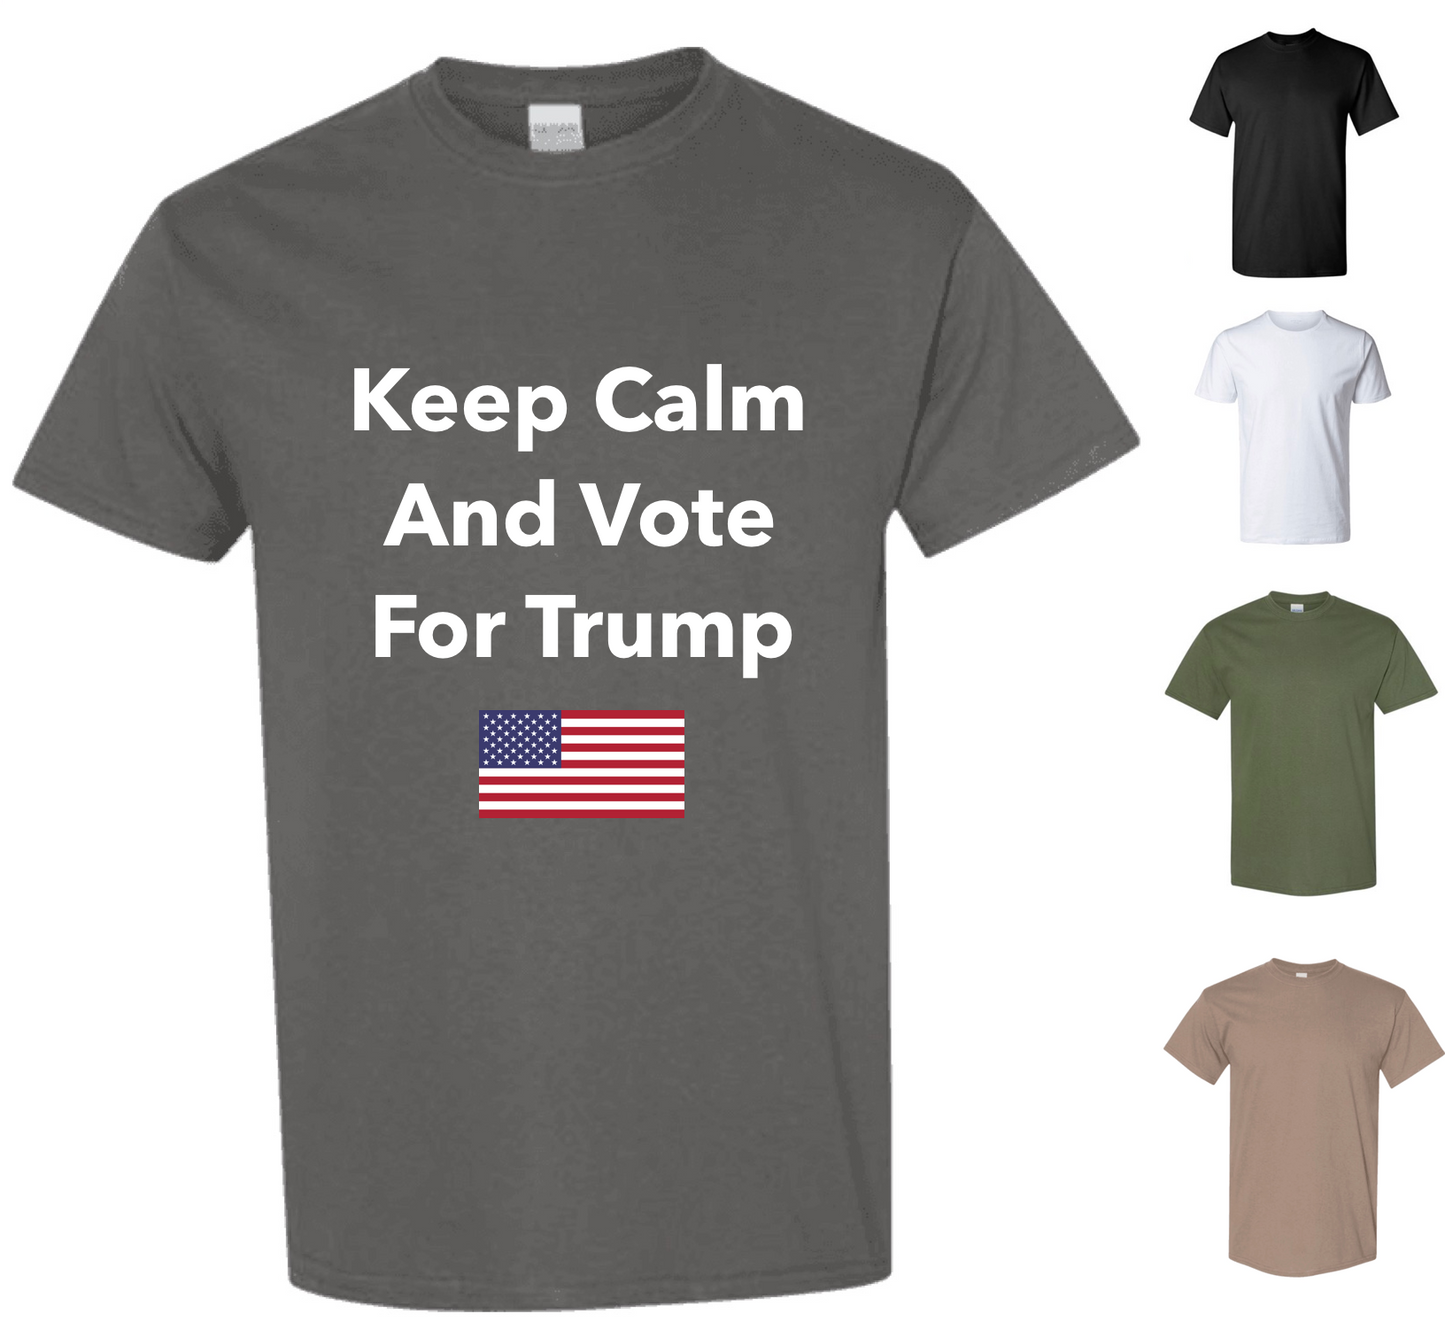 Keep Calm And Vote For Trump T-Shirt — Free Shipping!